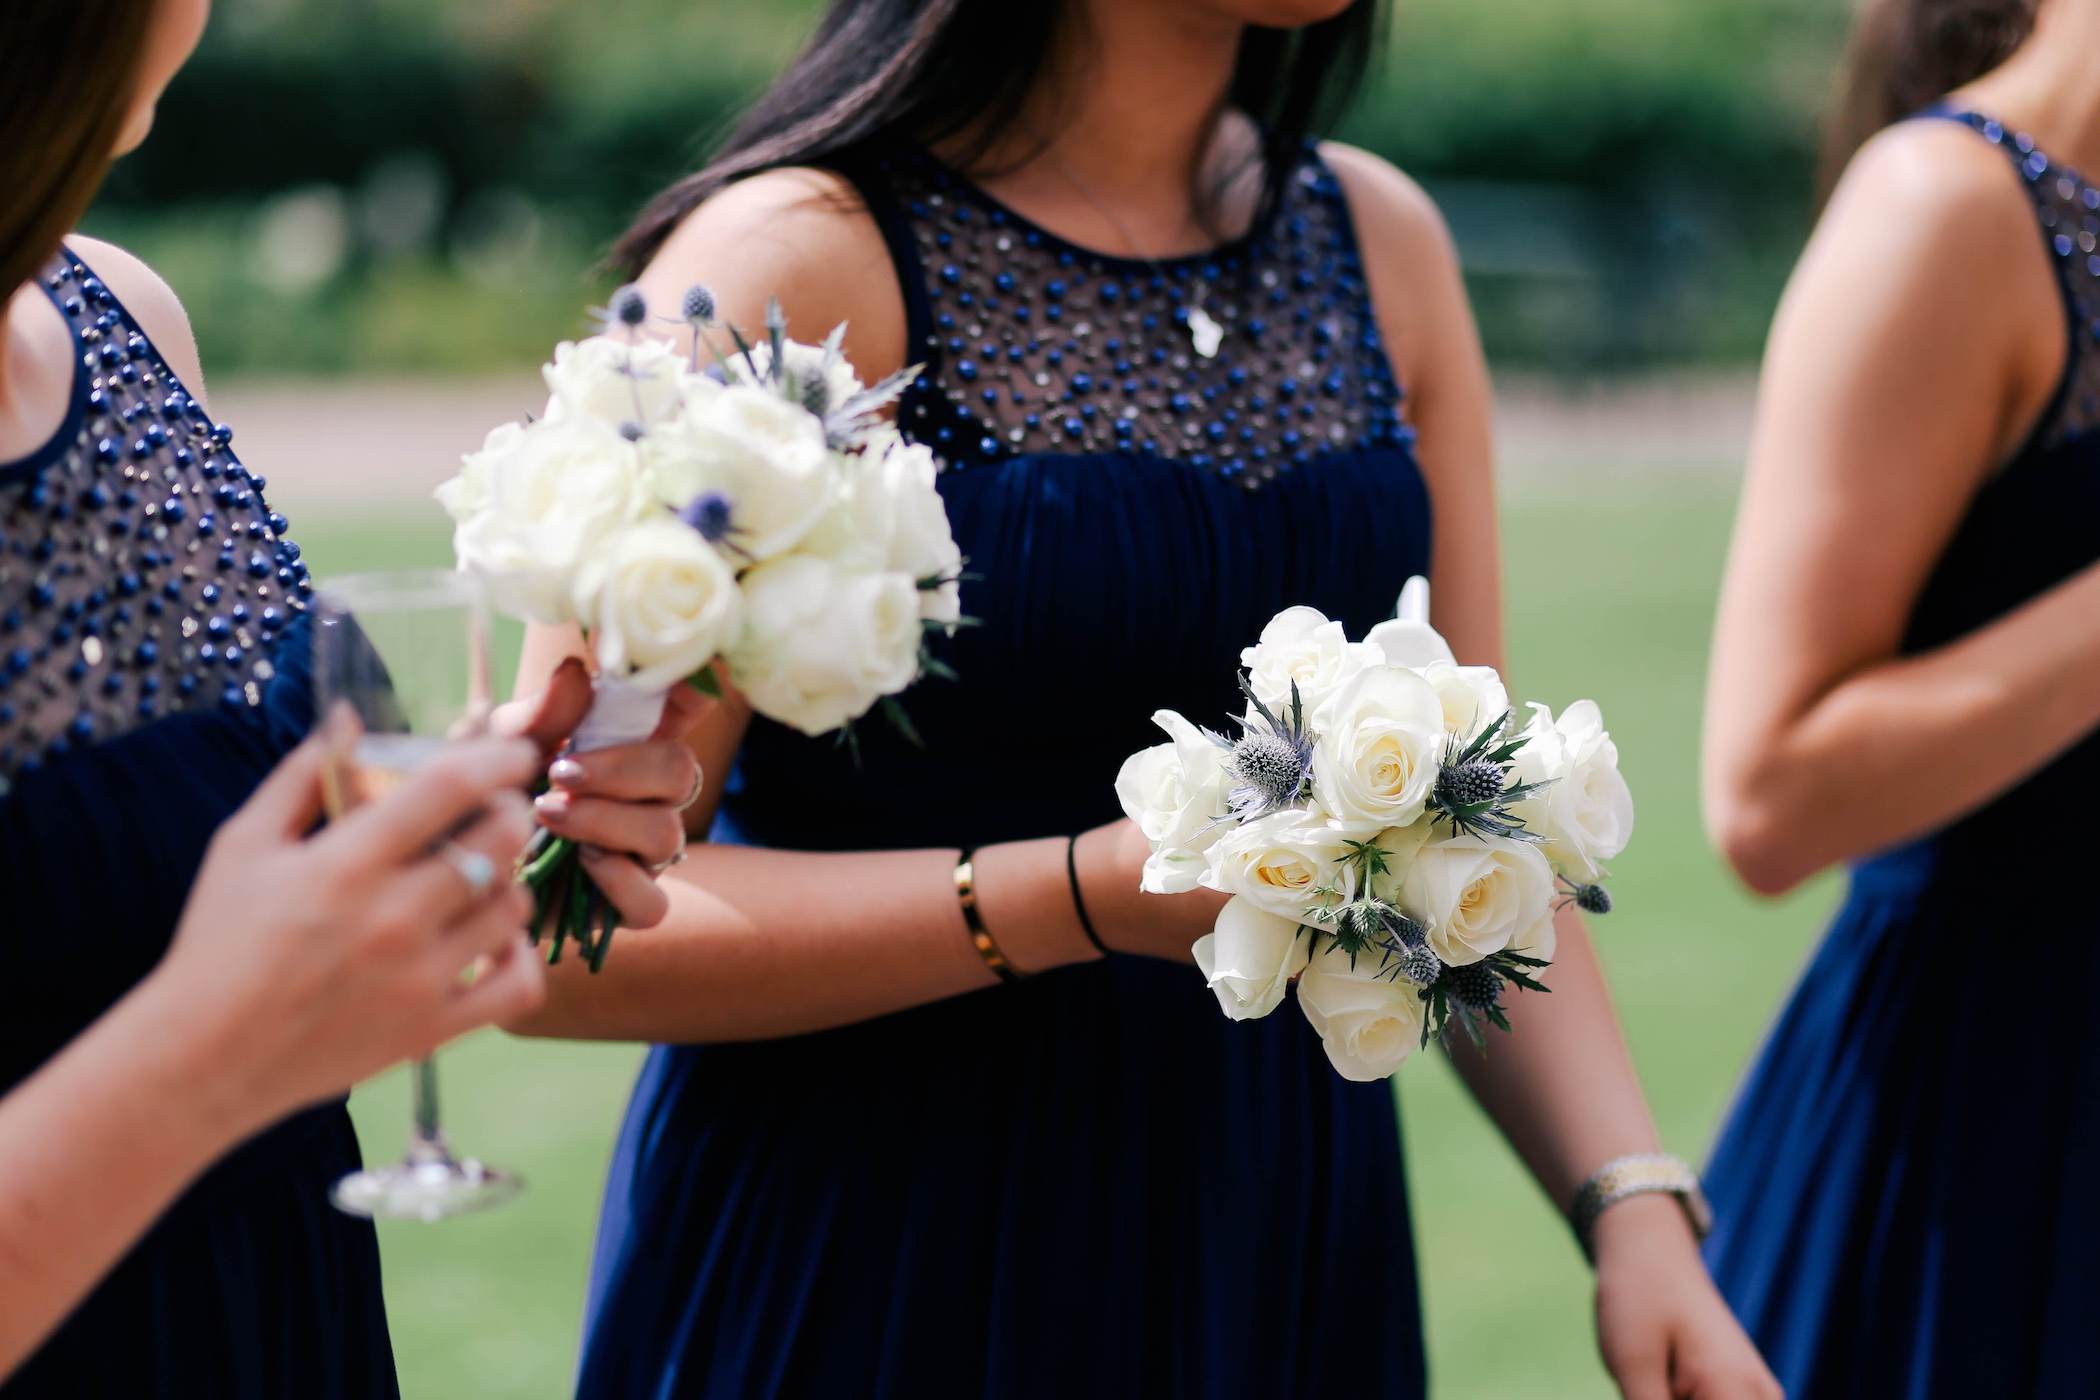 The dresses you choose for your bridesmaids should coordinate with the colors you are using for your event.